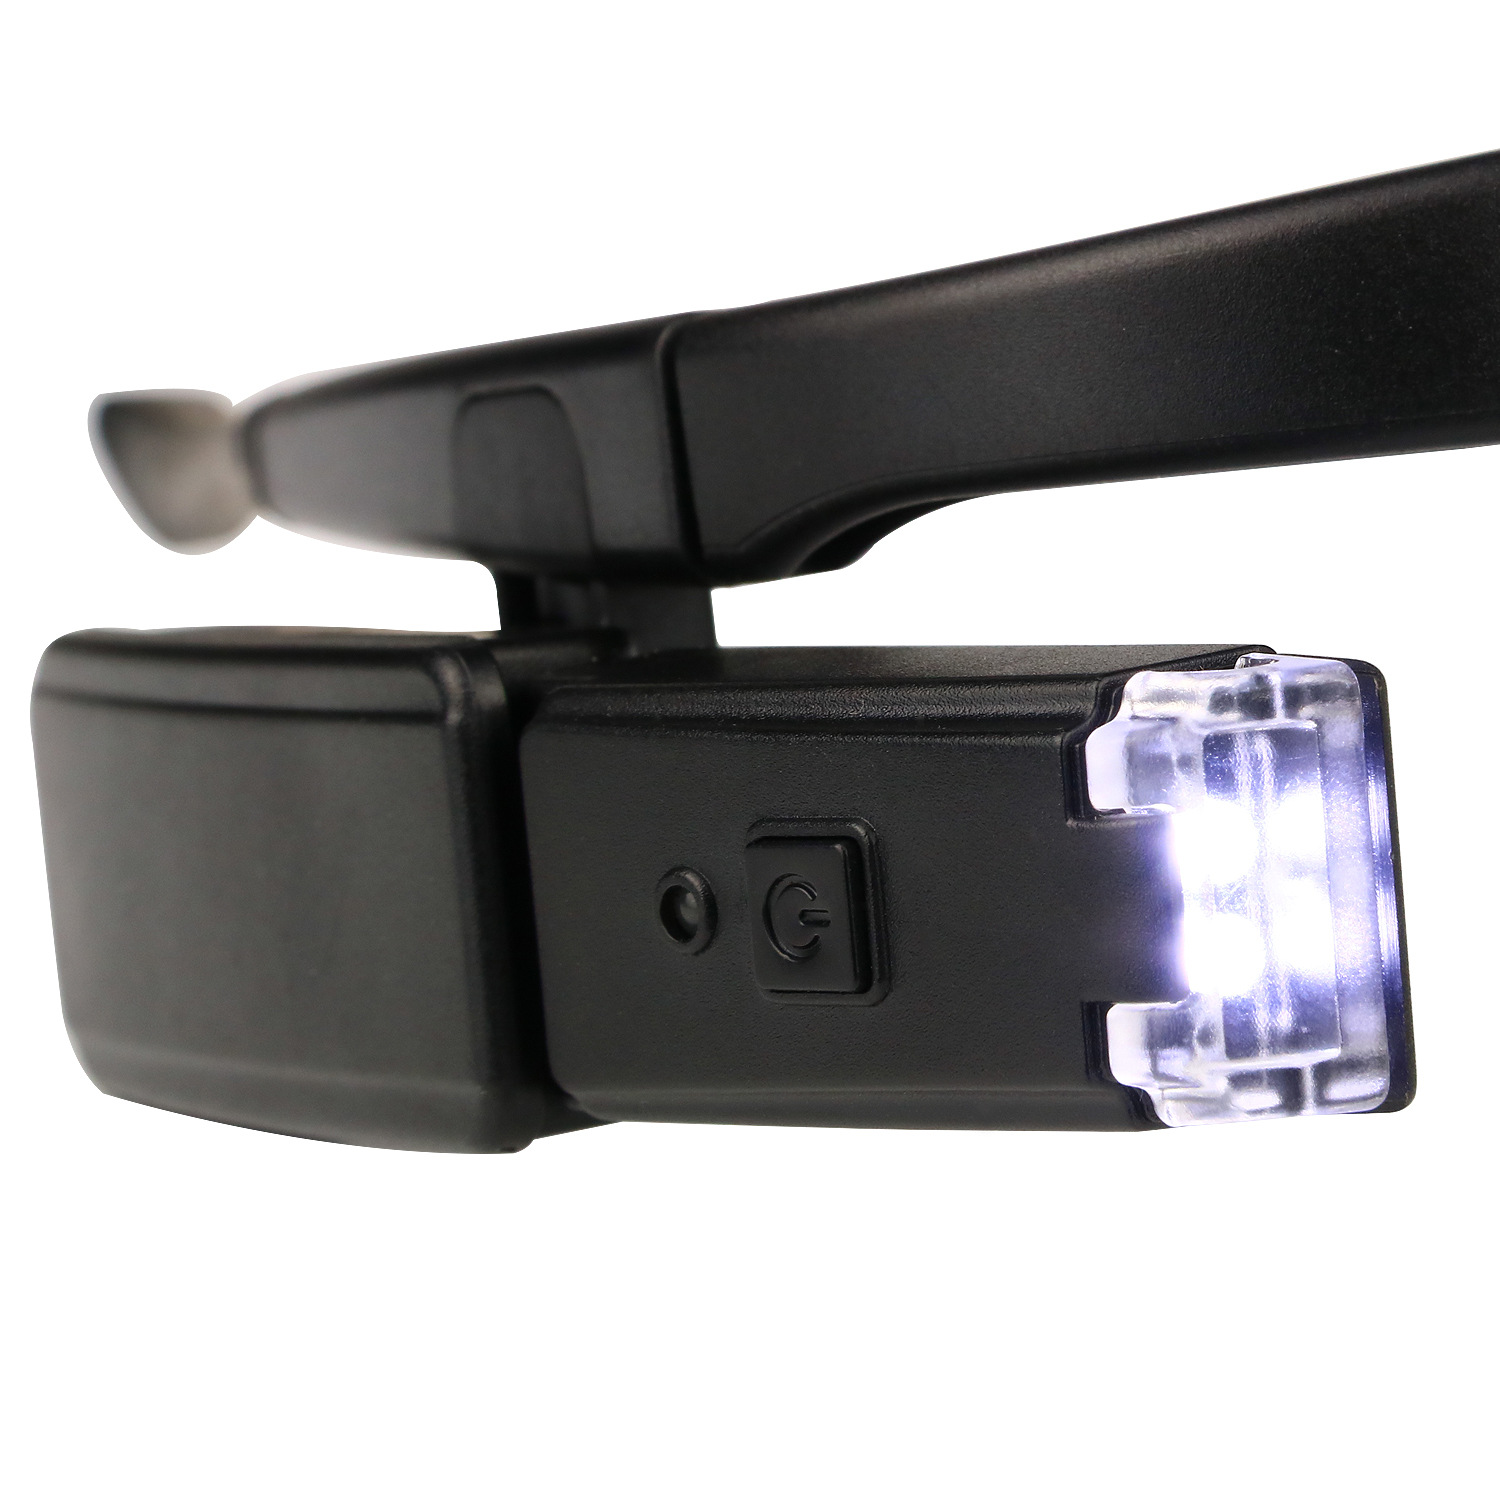 USB rechargeable LED illuminated spectacle type Head Magnifier